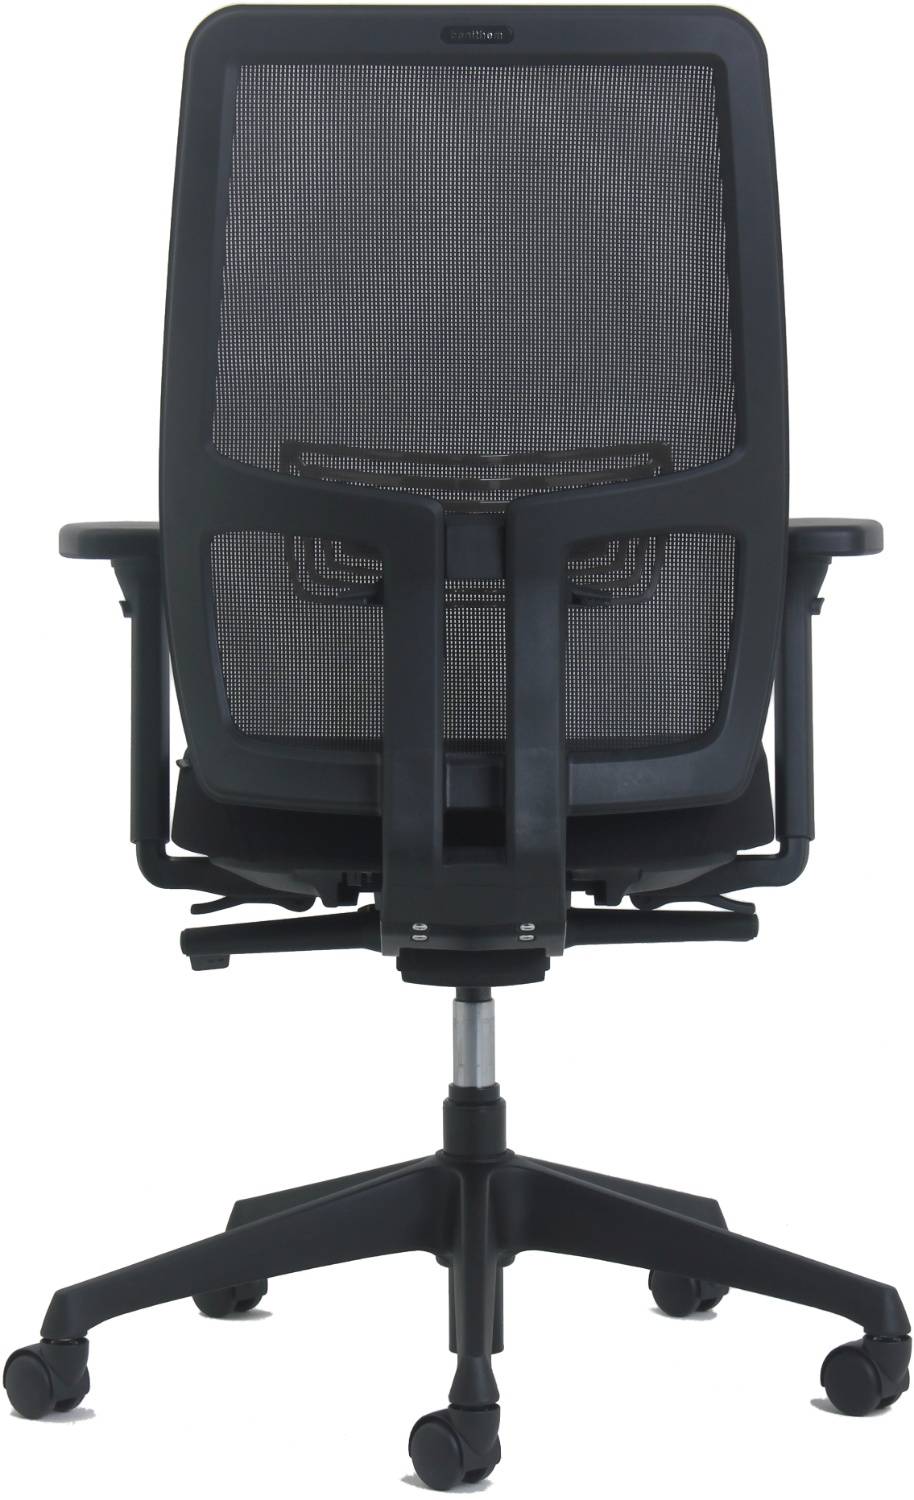 Office chair Pinto black